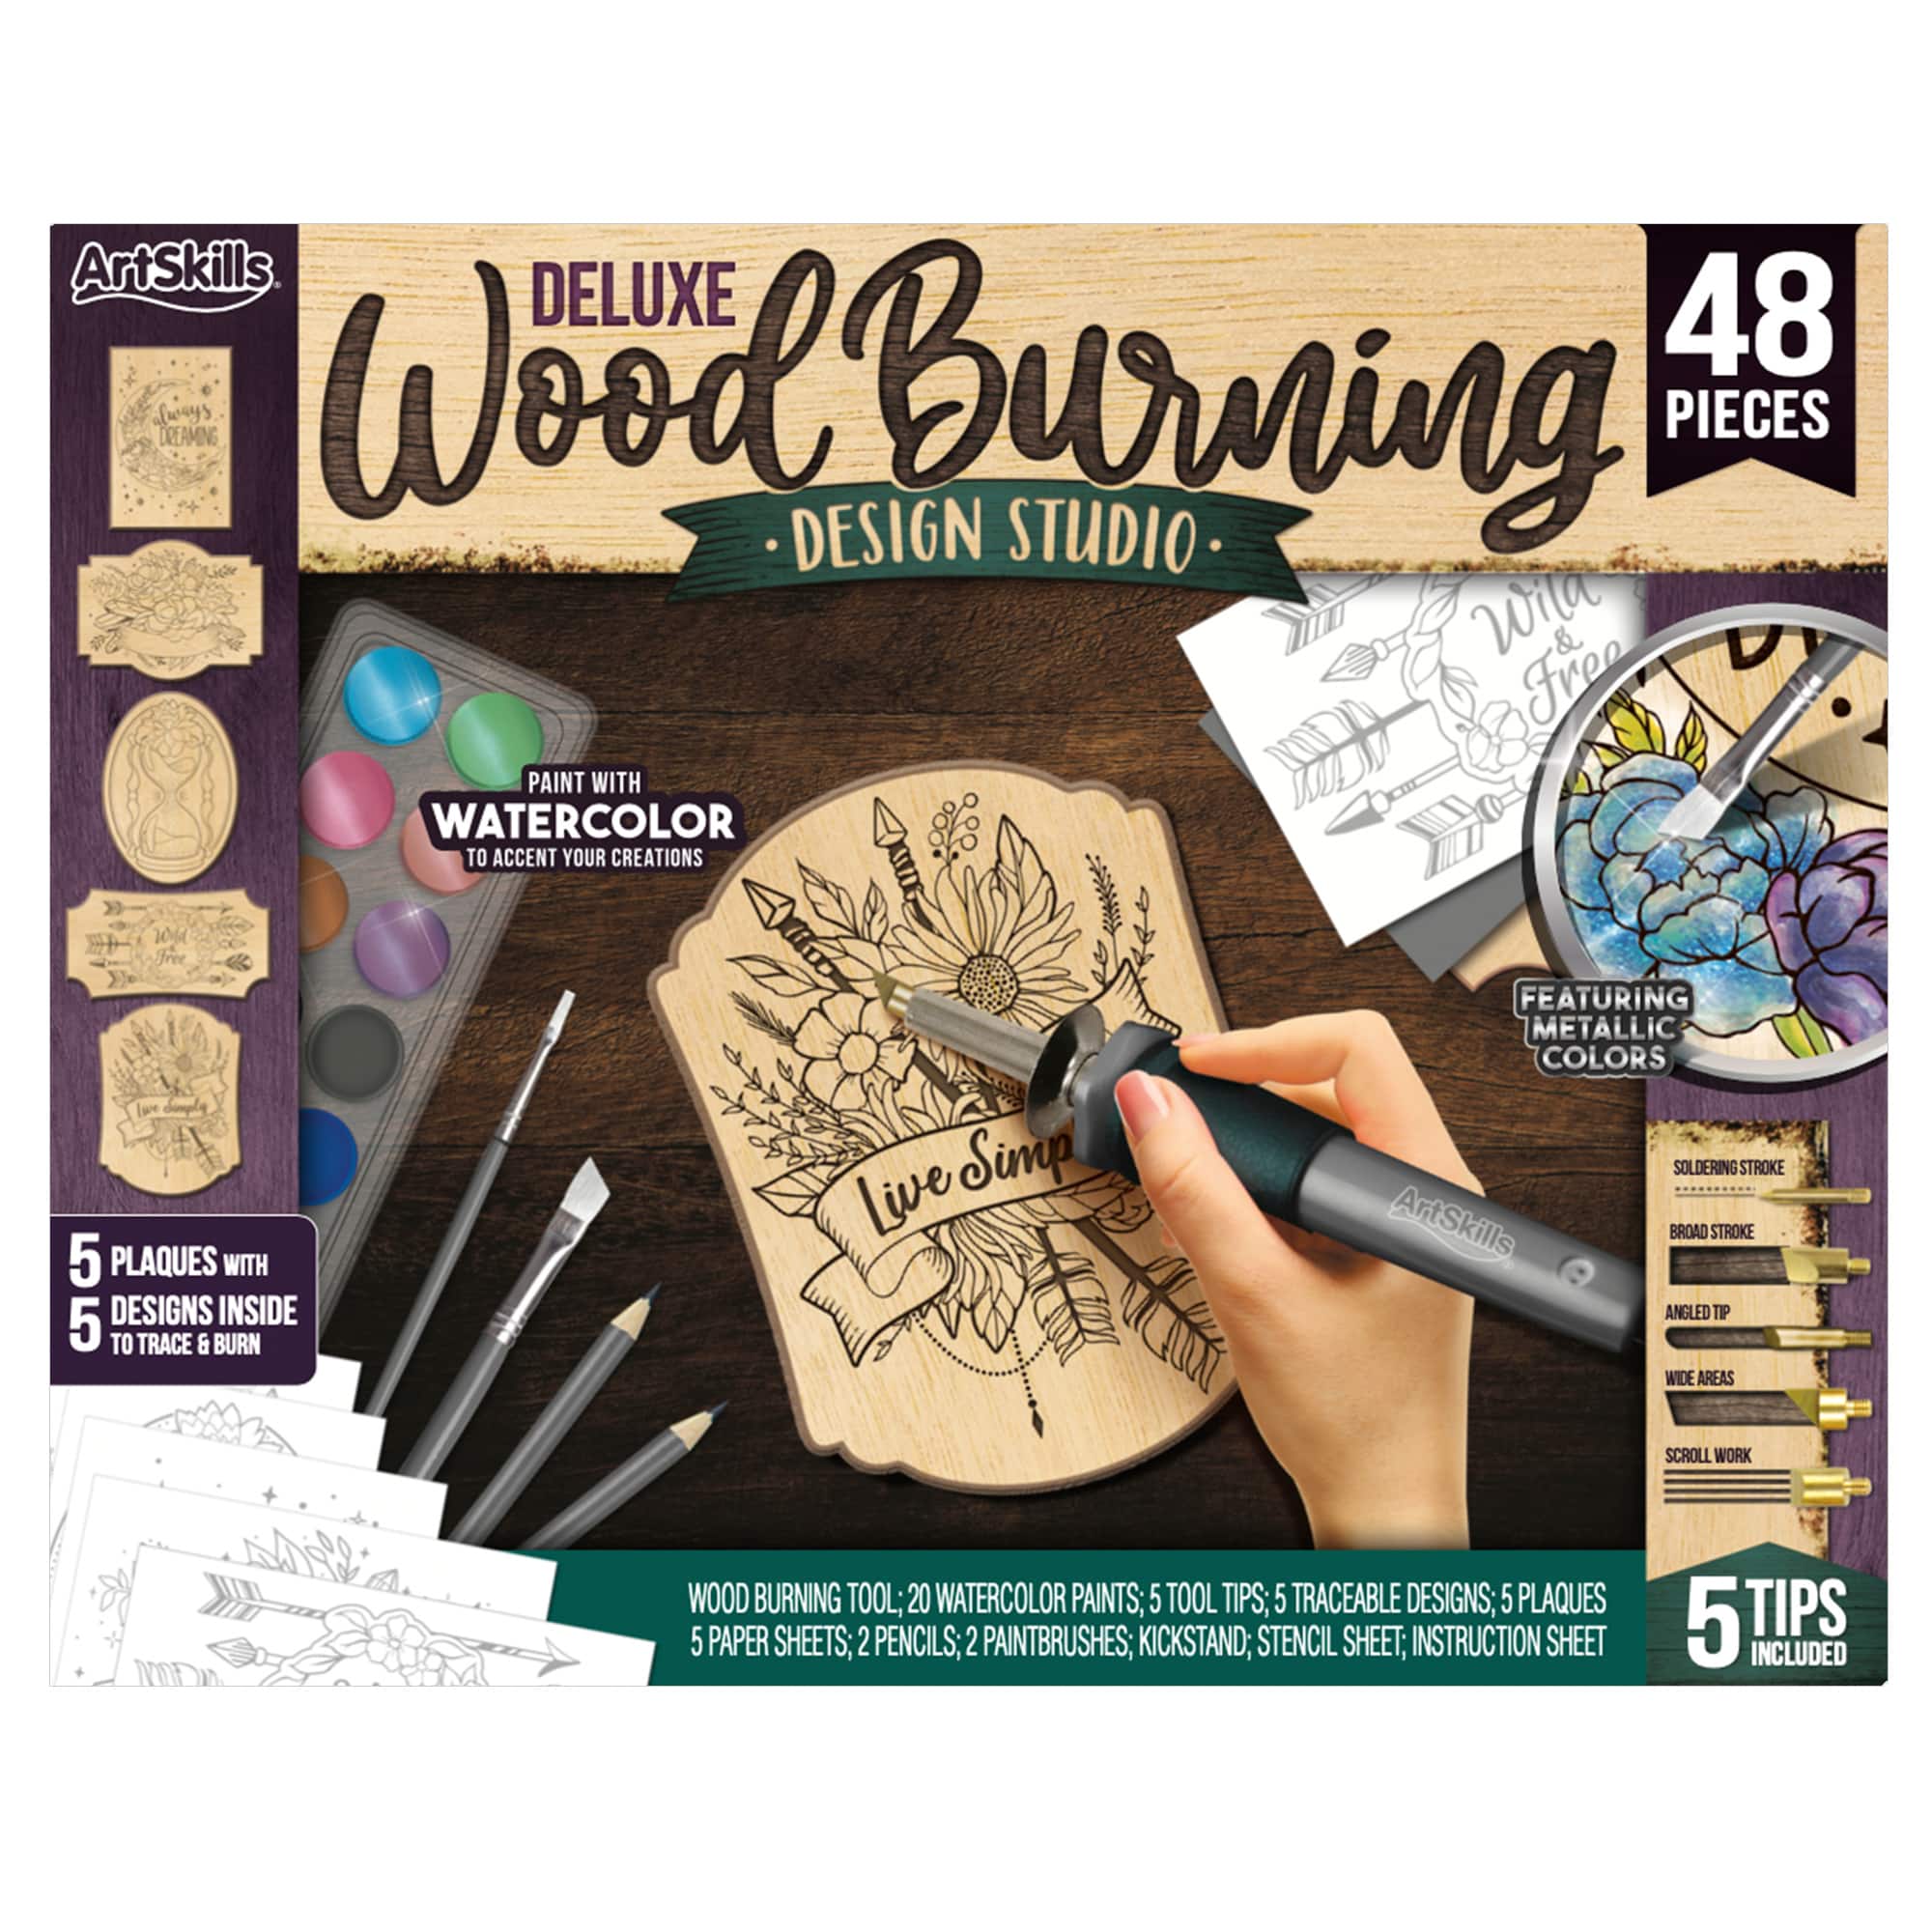 Wood Burning Techniques  Making Stamps 